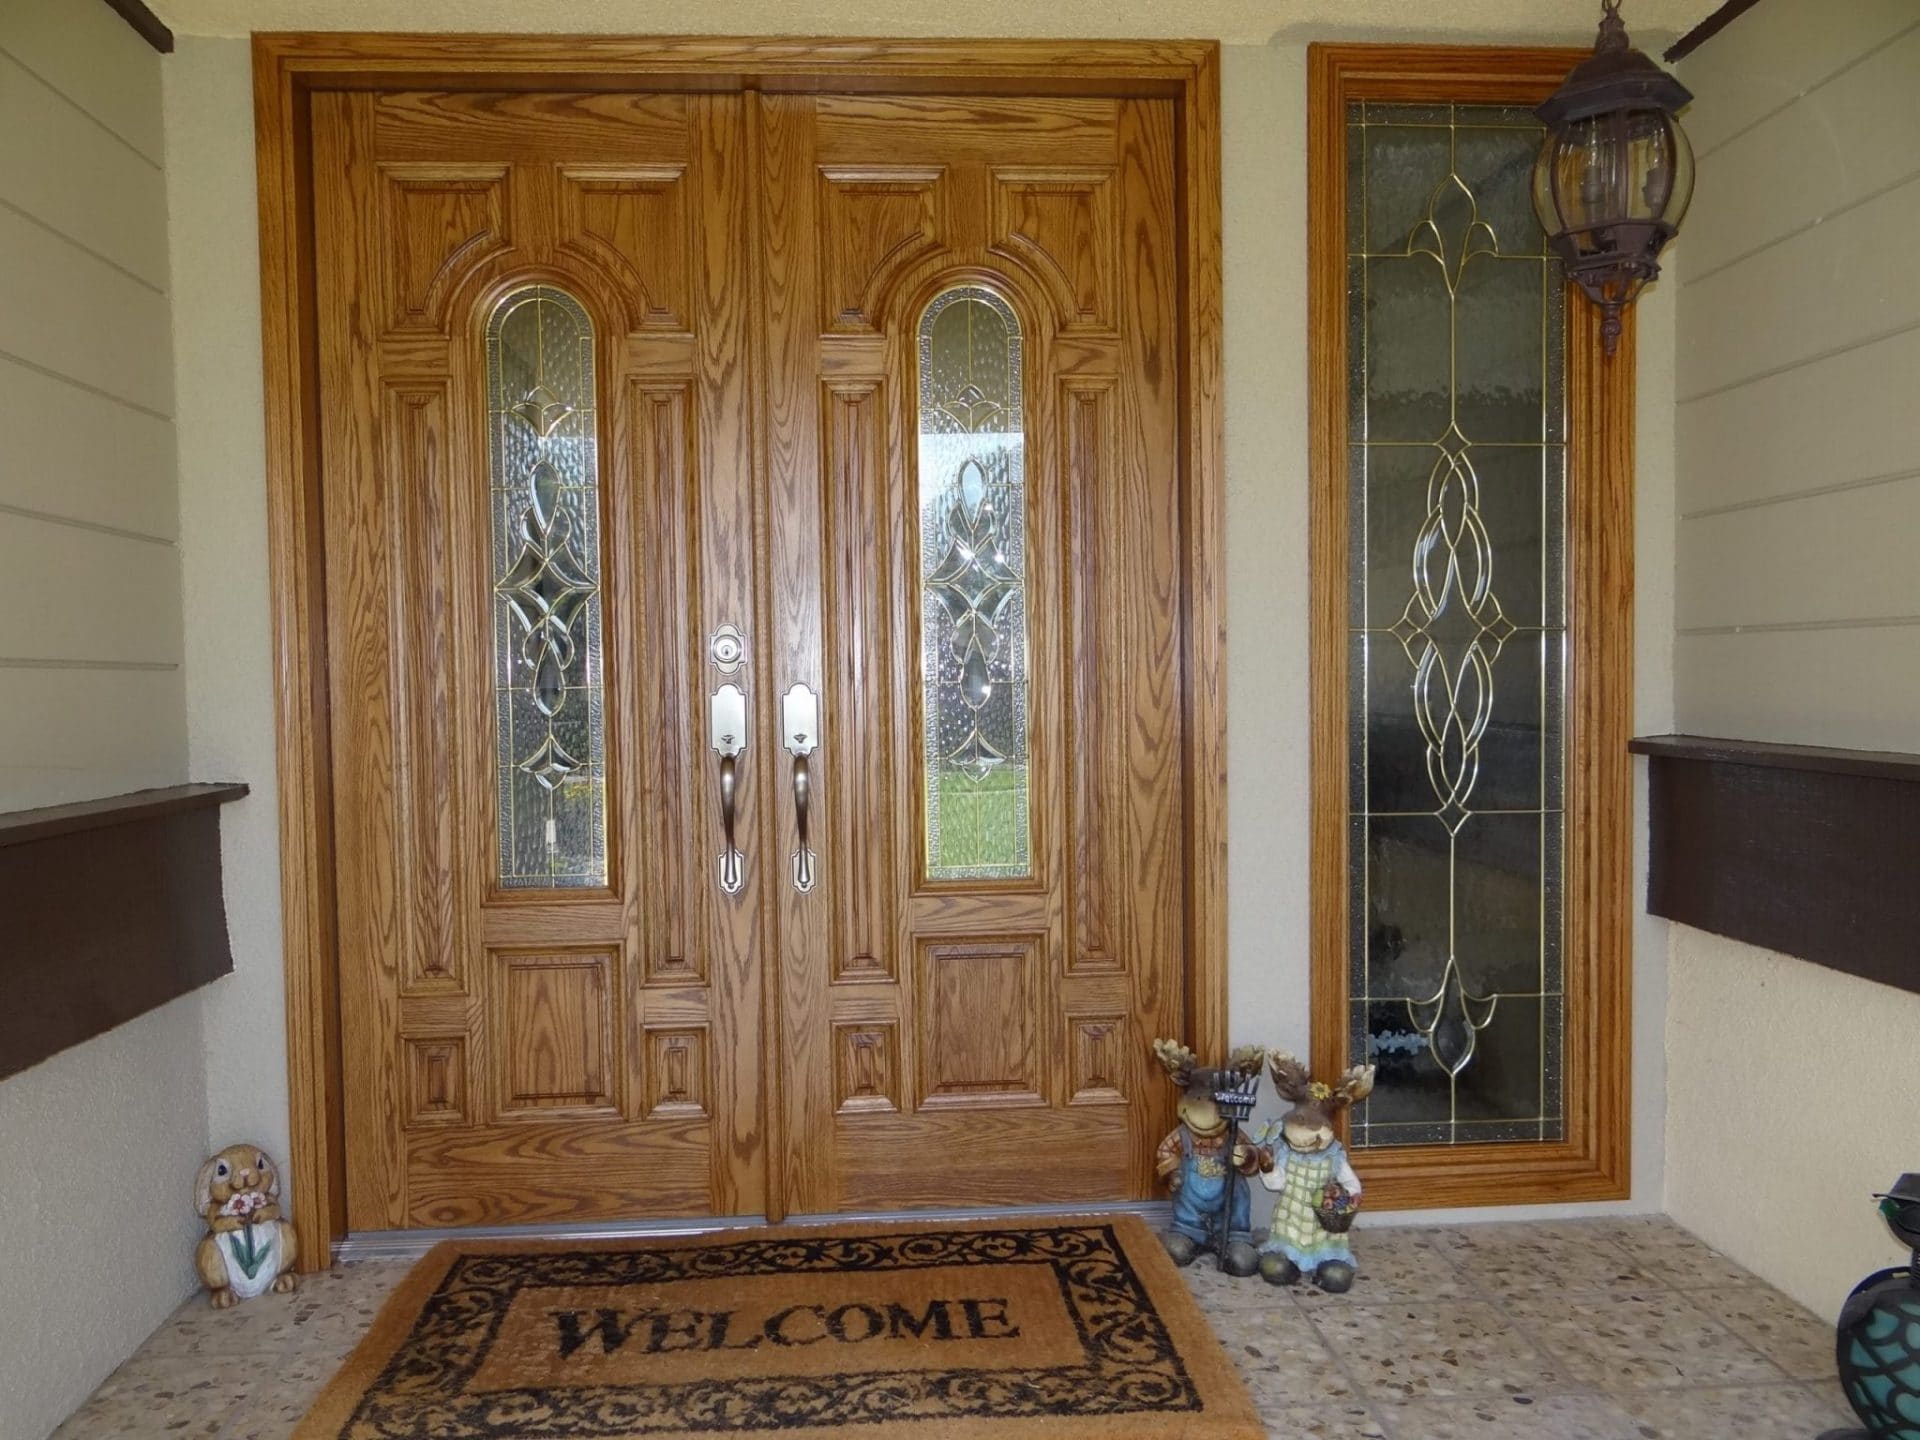 Brass Came Leaded Windows Made for A Customer's New Entryway